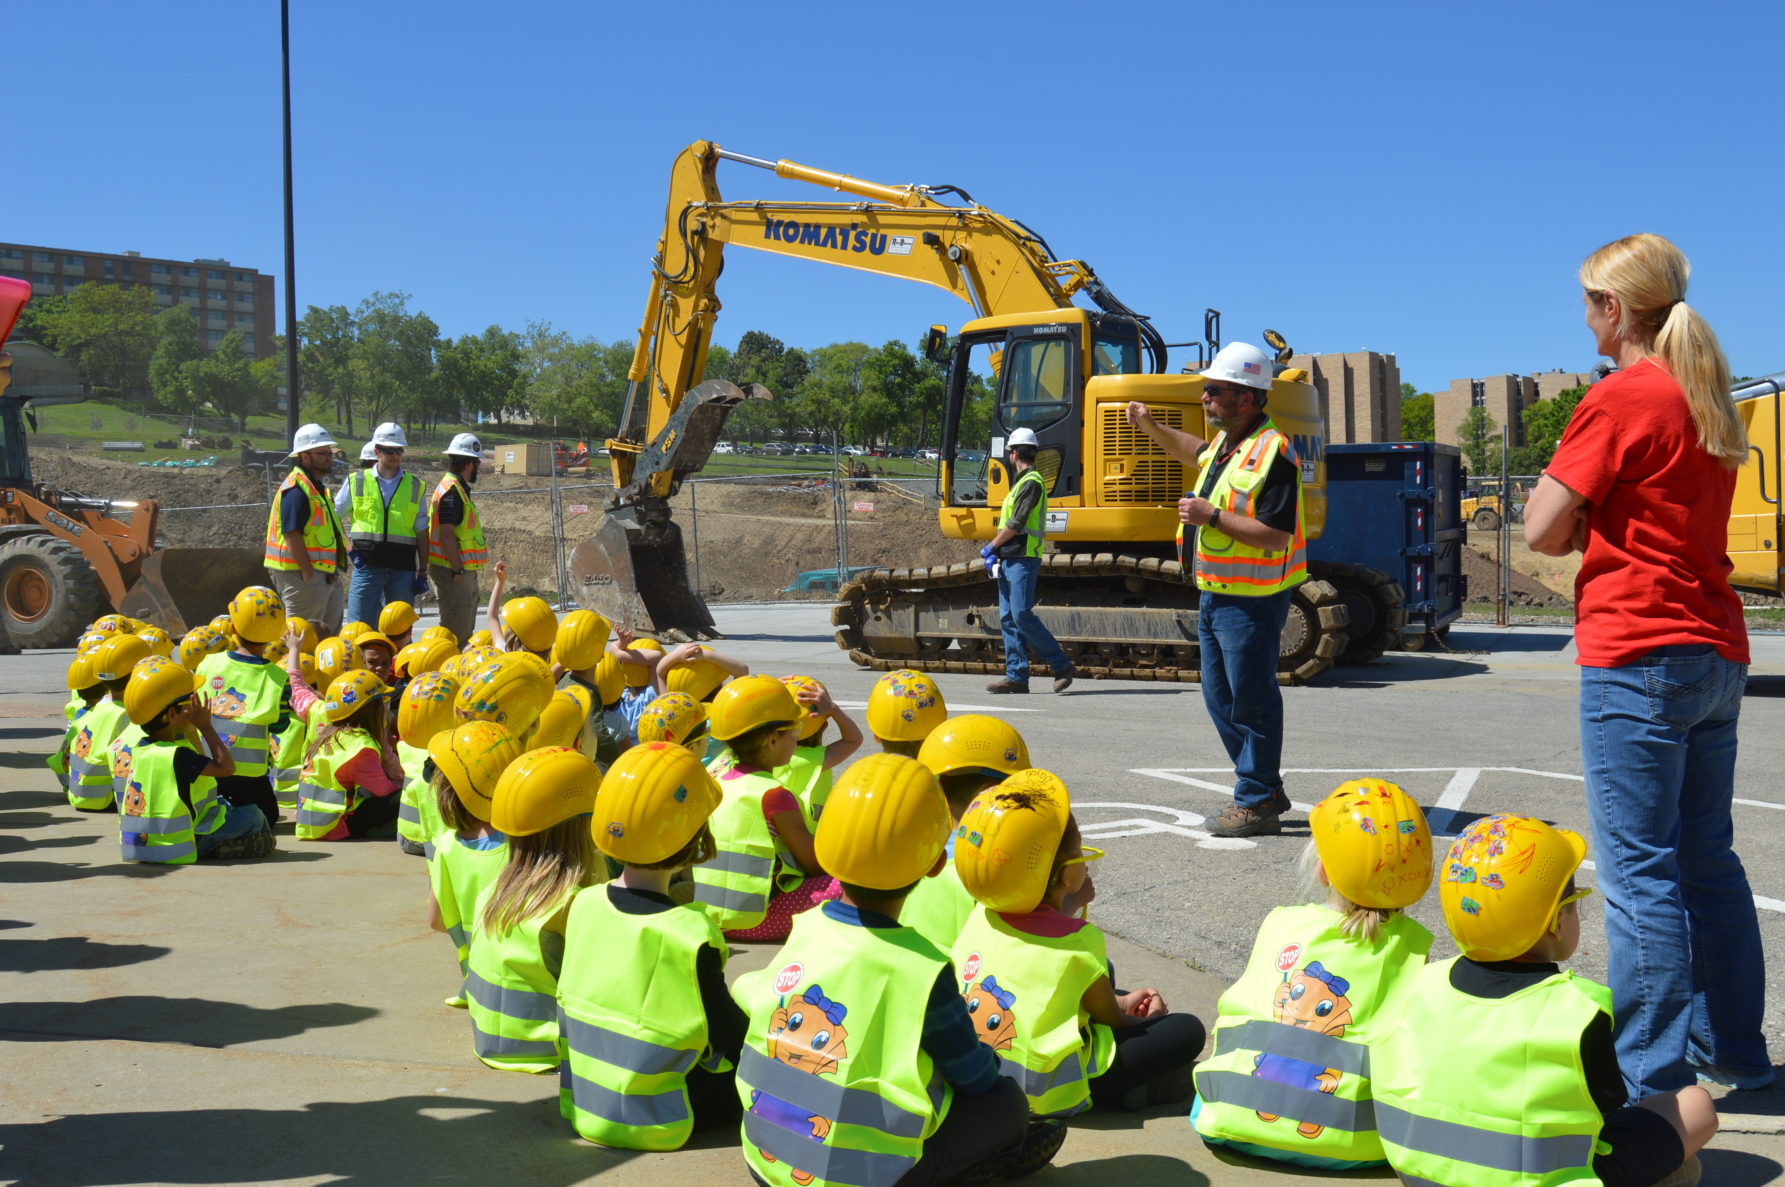 Students in hardhats at a McCownGordon Construction site